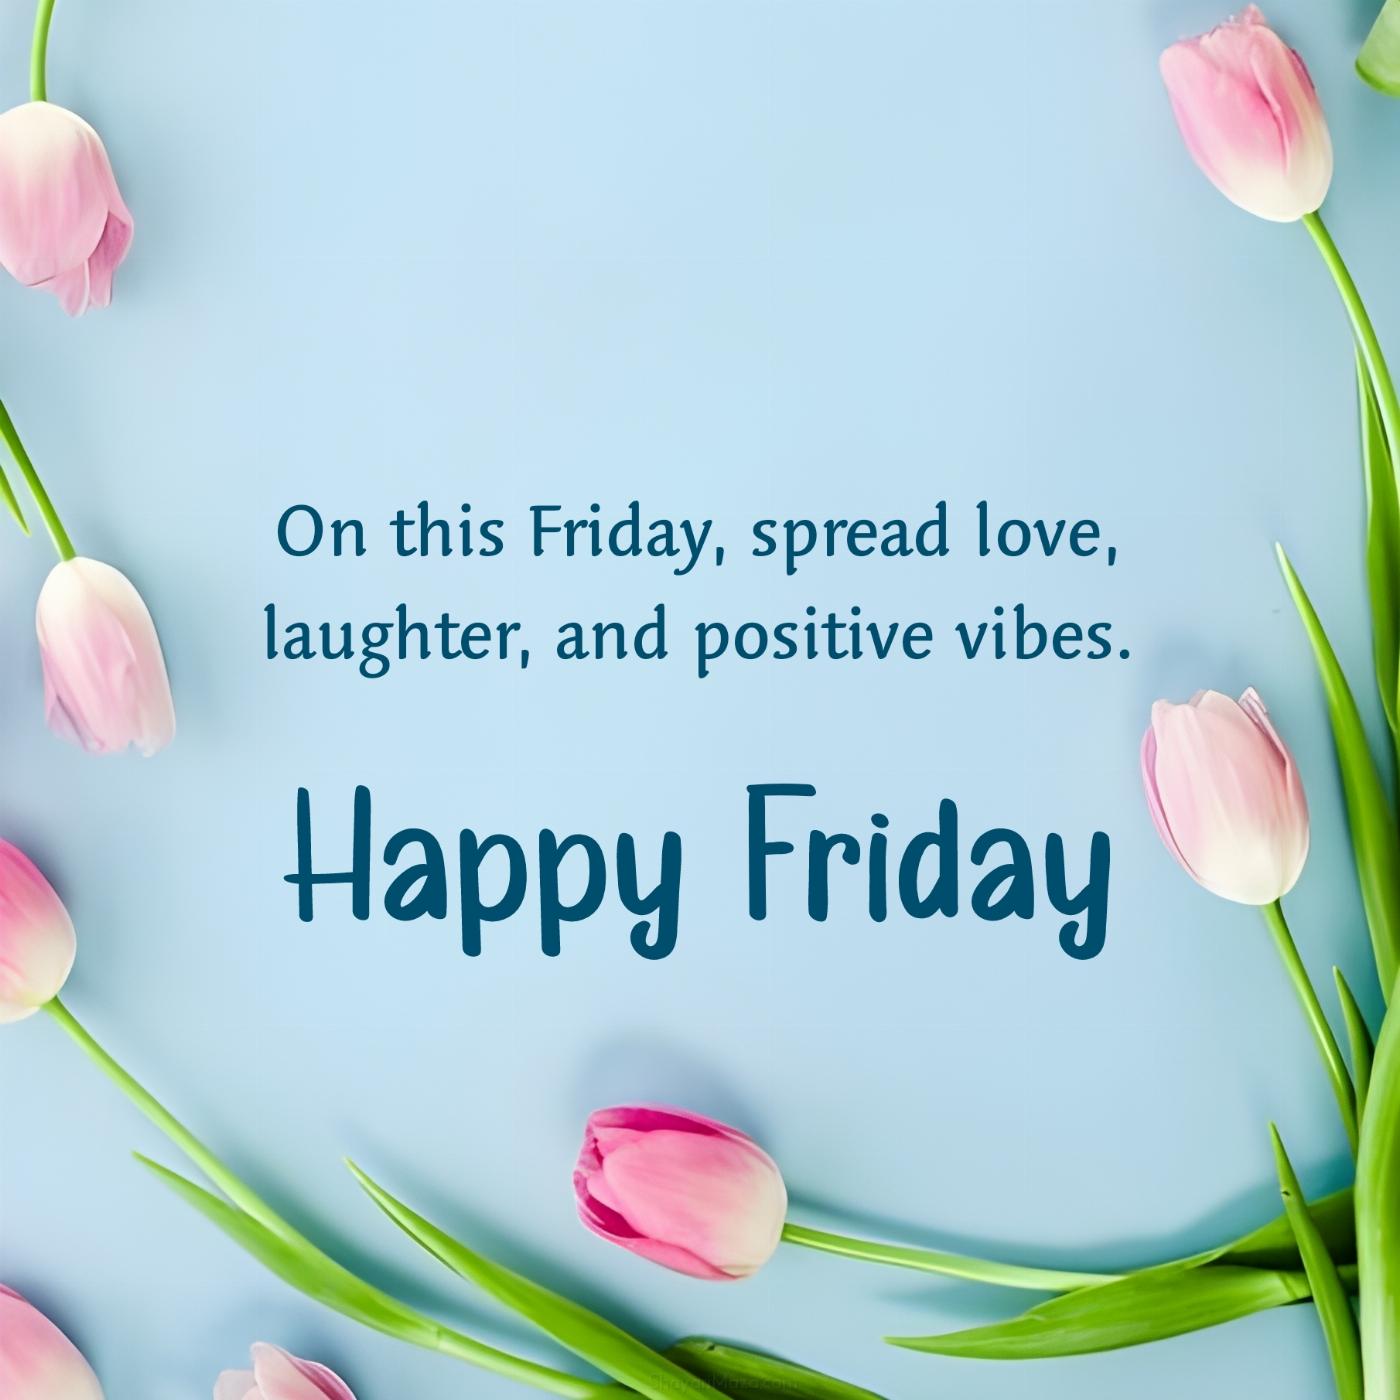 On this Friday spread love laughter and positive vibes